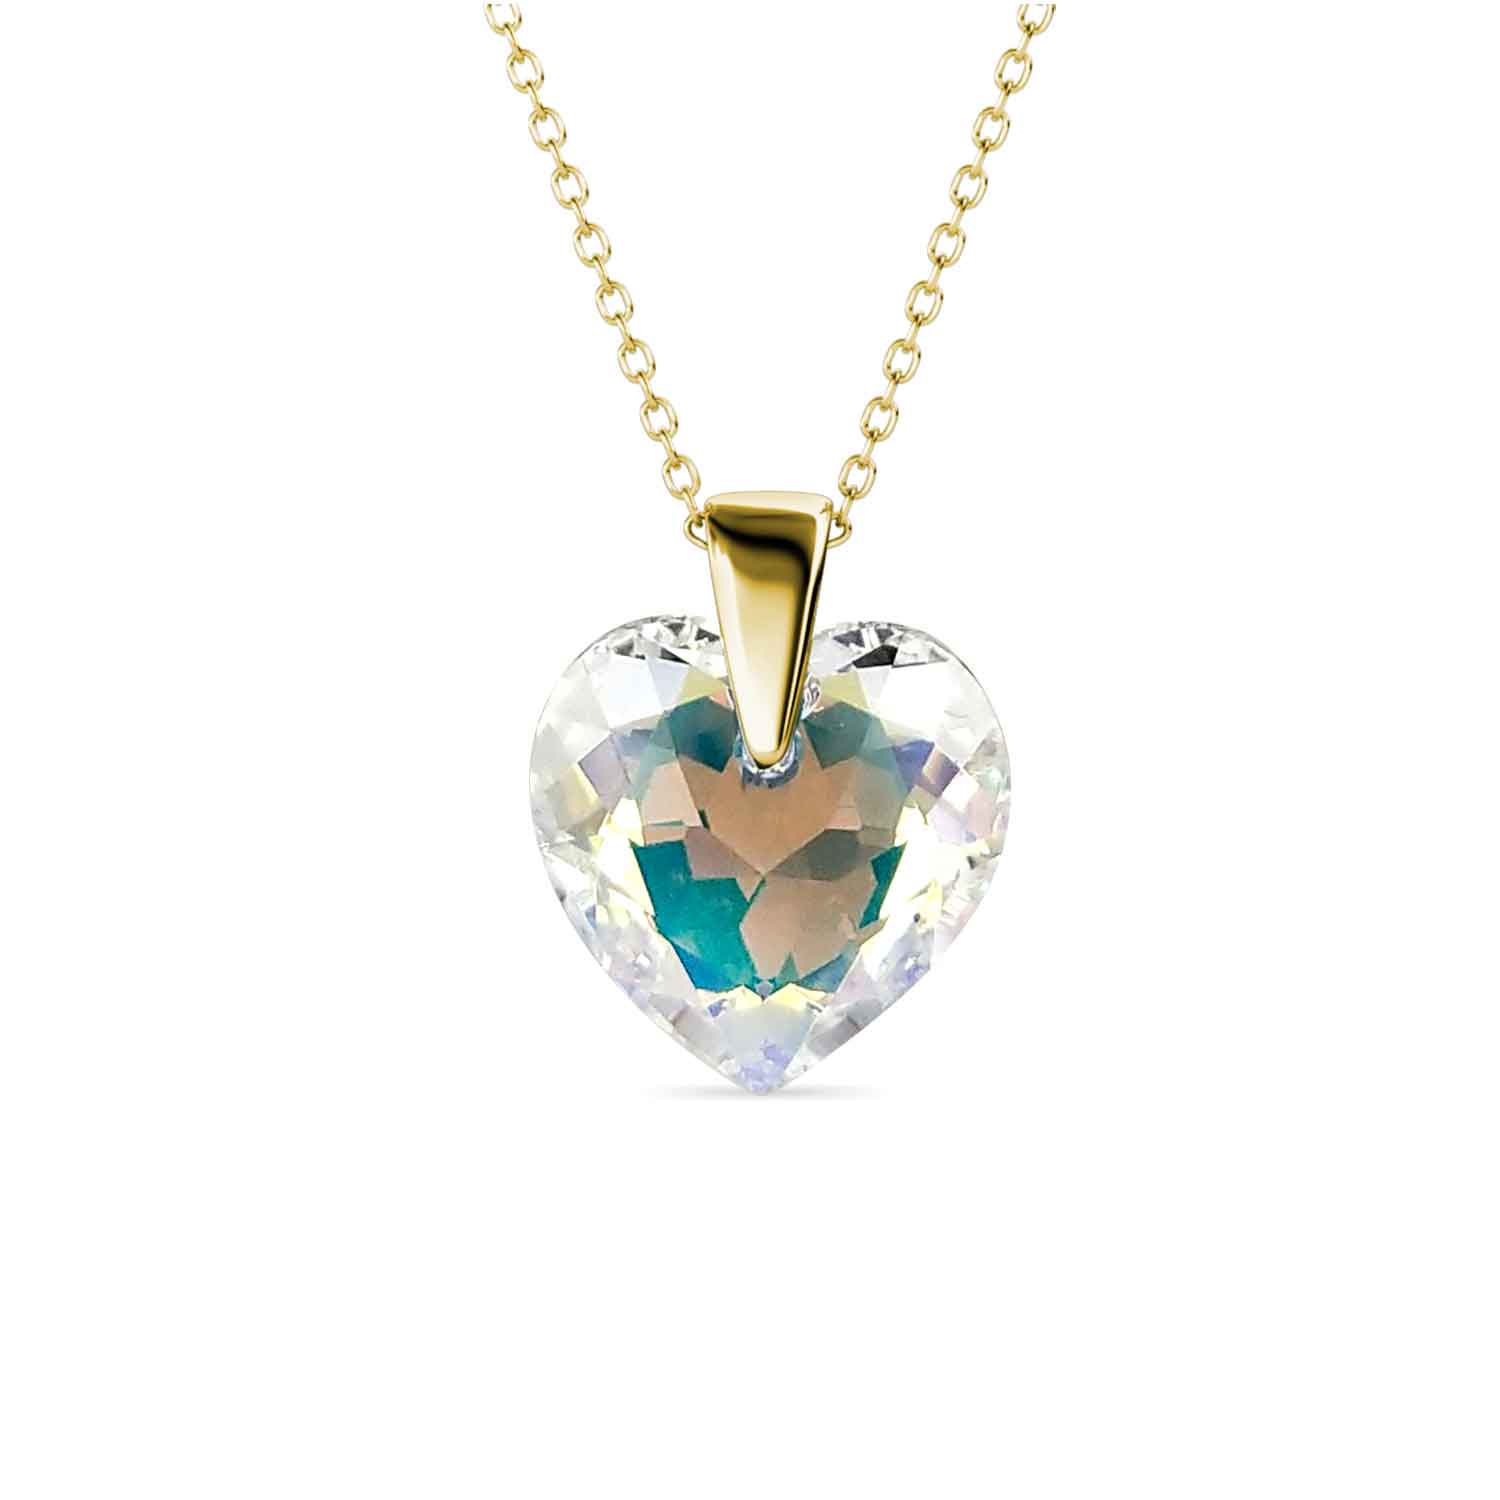 Bling Queen Women's Crystal Heart Pendant Necklace With Zircon Stones,  Zircon Stone Necklace, Crystal Heart Necklace, Necklace For Women, Heart  Jewelry For Women,Crystal Necklace,(Rose Gold) : Amazon.in: Fashion